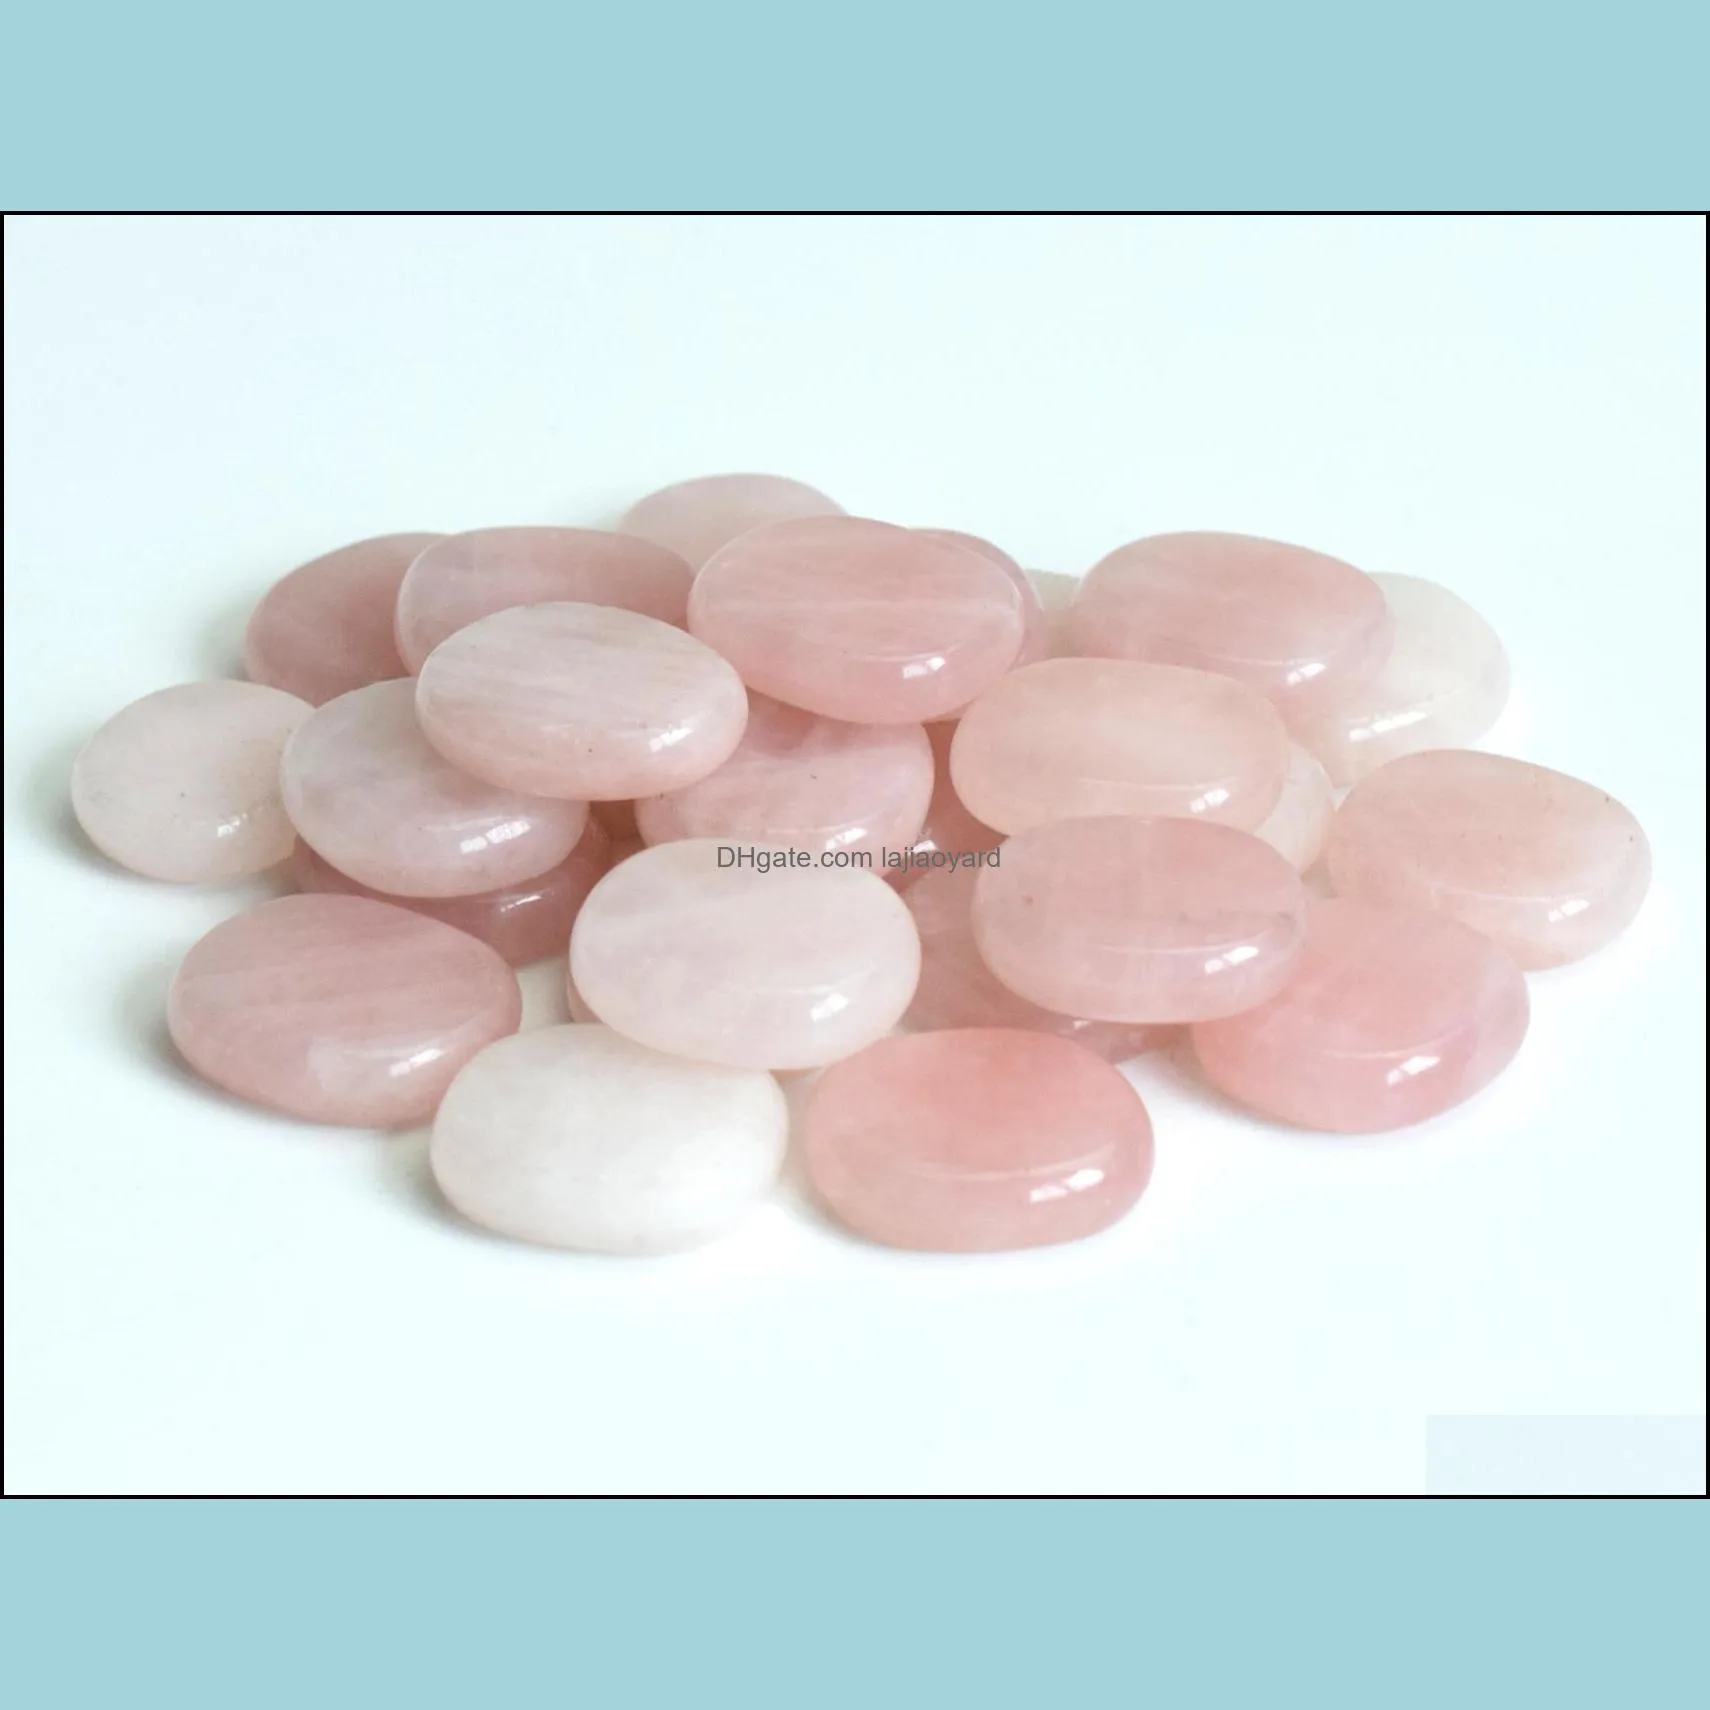 Set of 10 pieces Natural Tumbled Chakra Rose Quartz Carved Crystal Reiki Healing Palm Stones with a Free Pouch